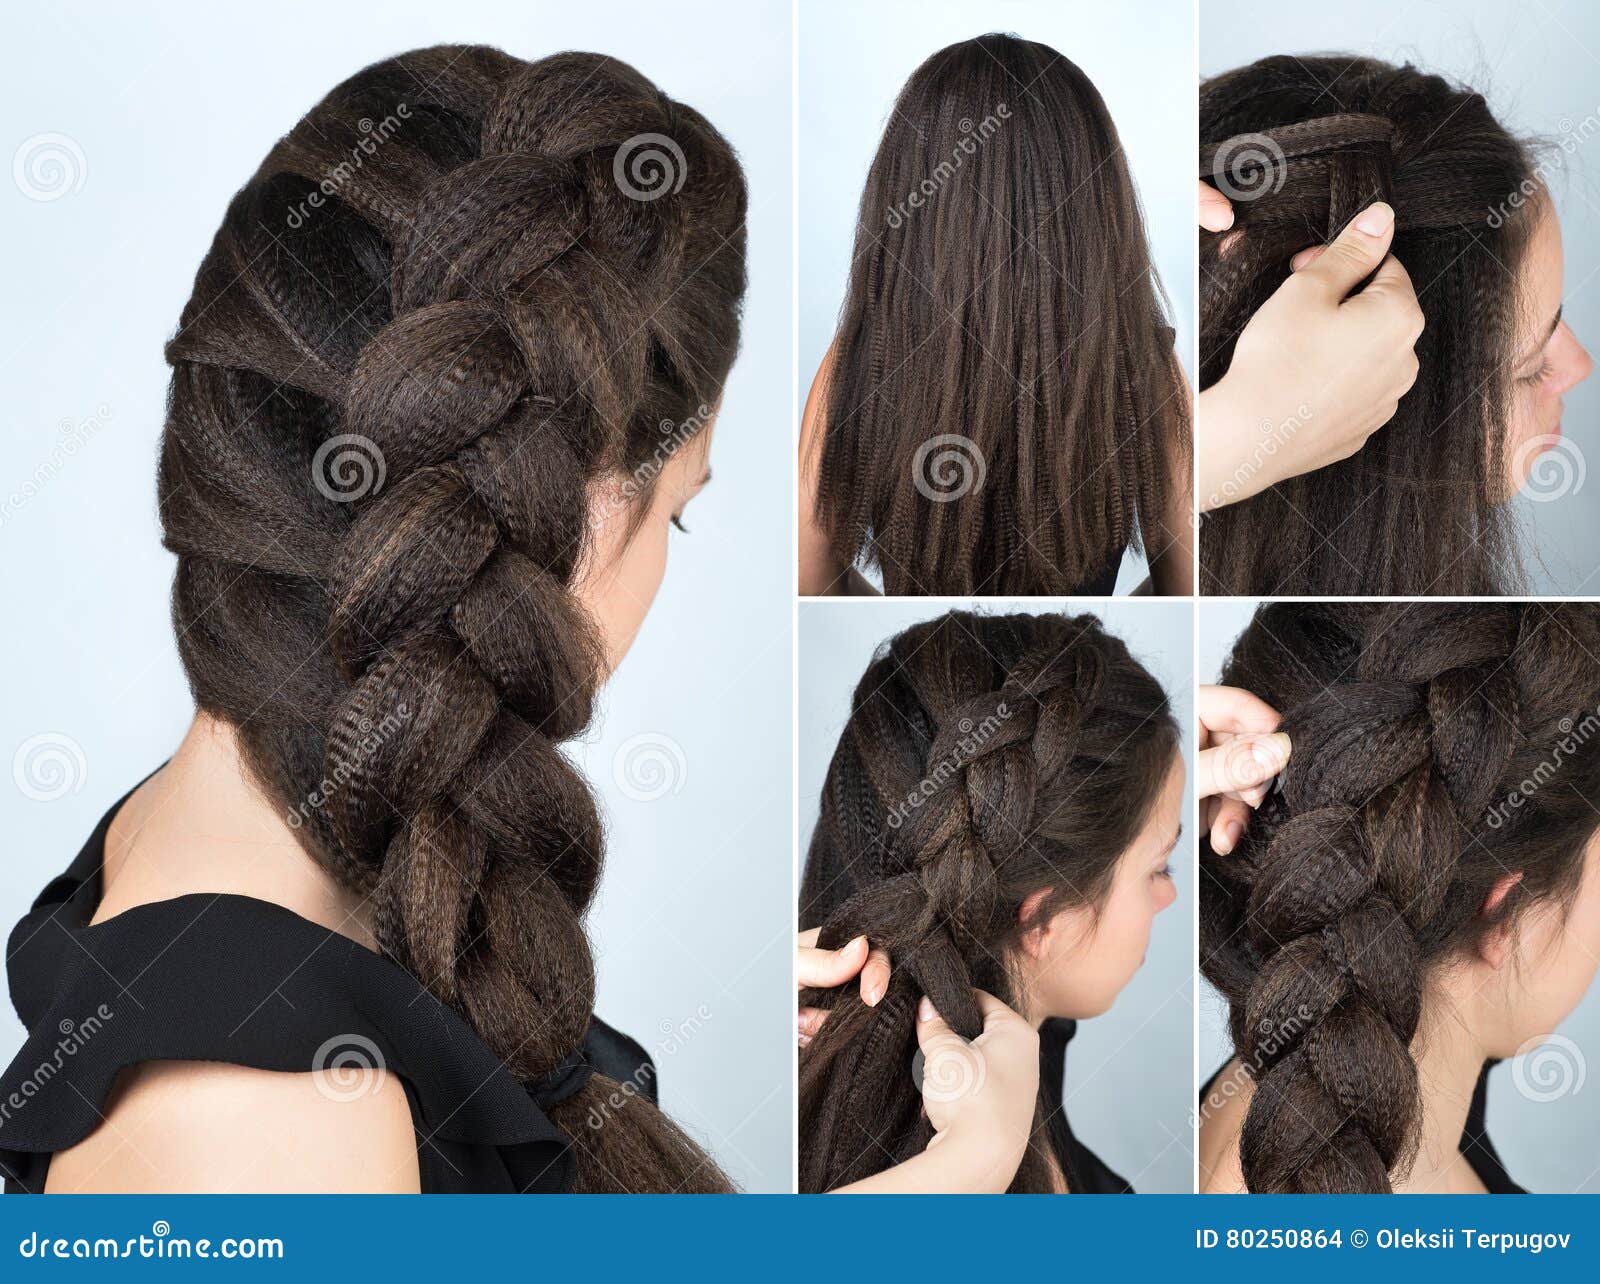 Hairstyle Braid To One Side Tutorial Stock Photo - Image of hair ...